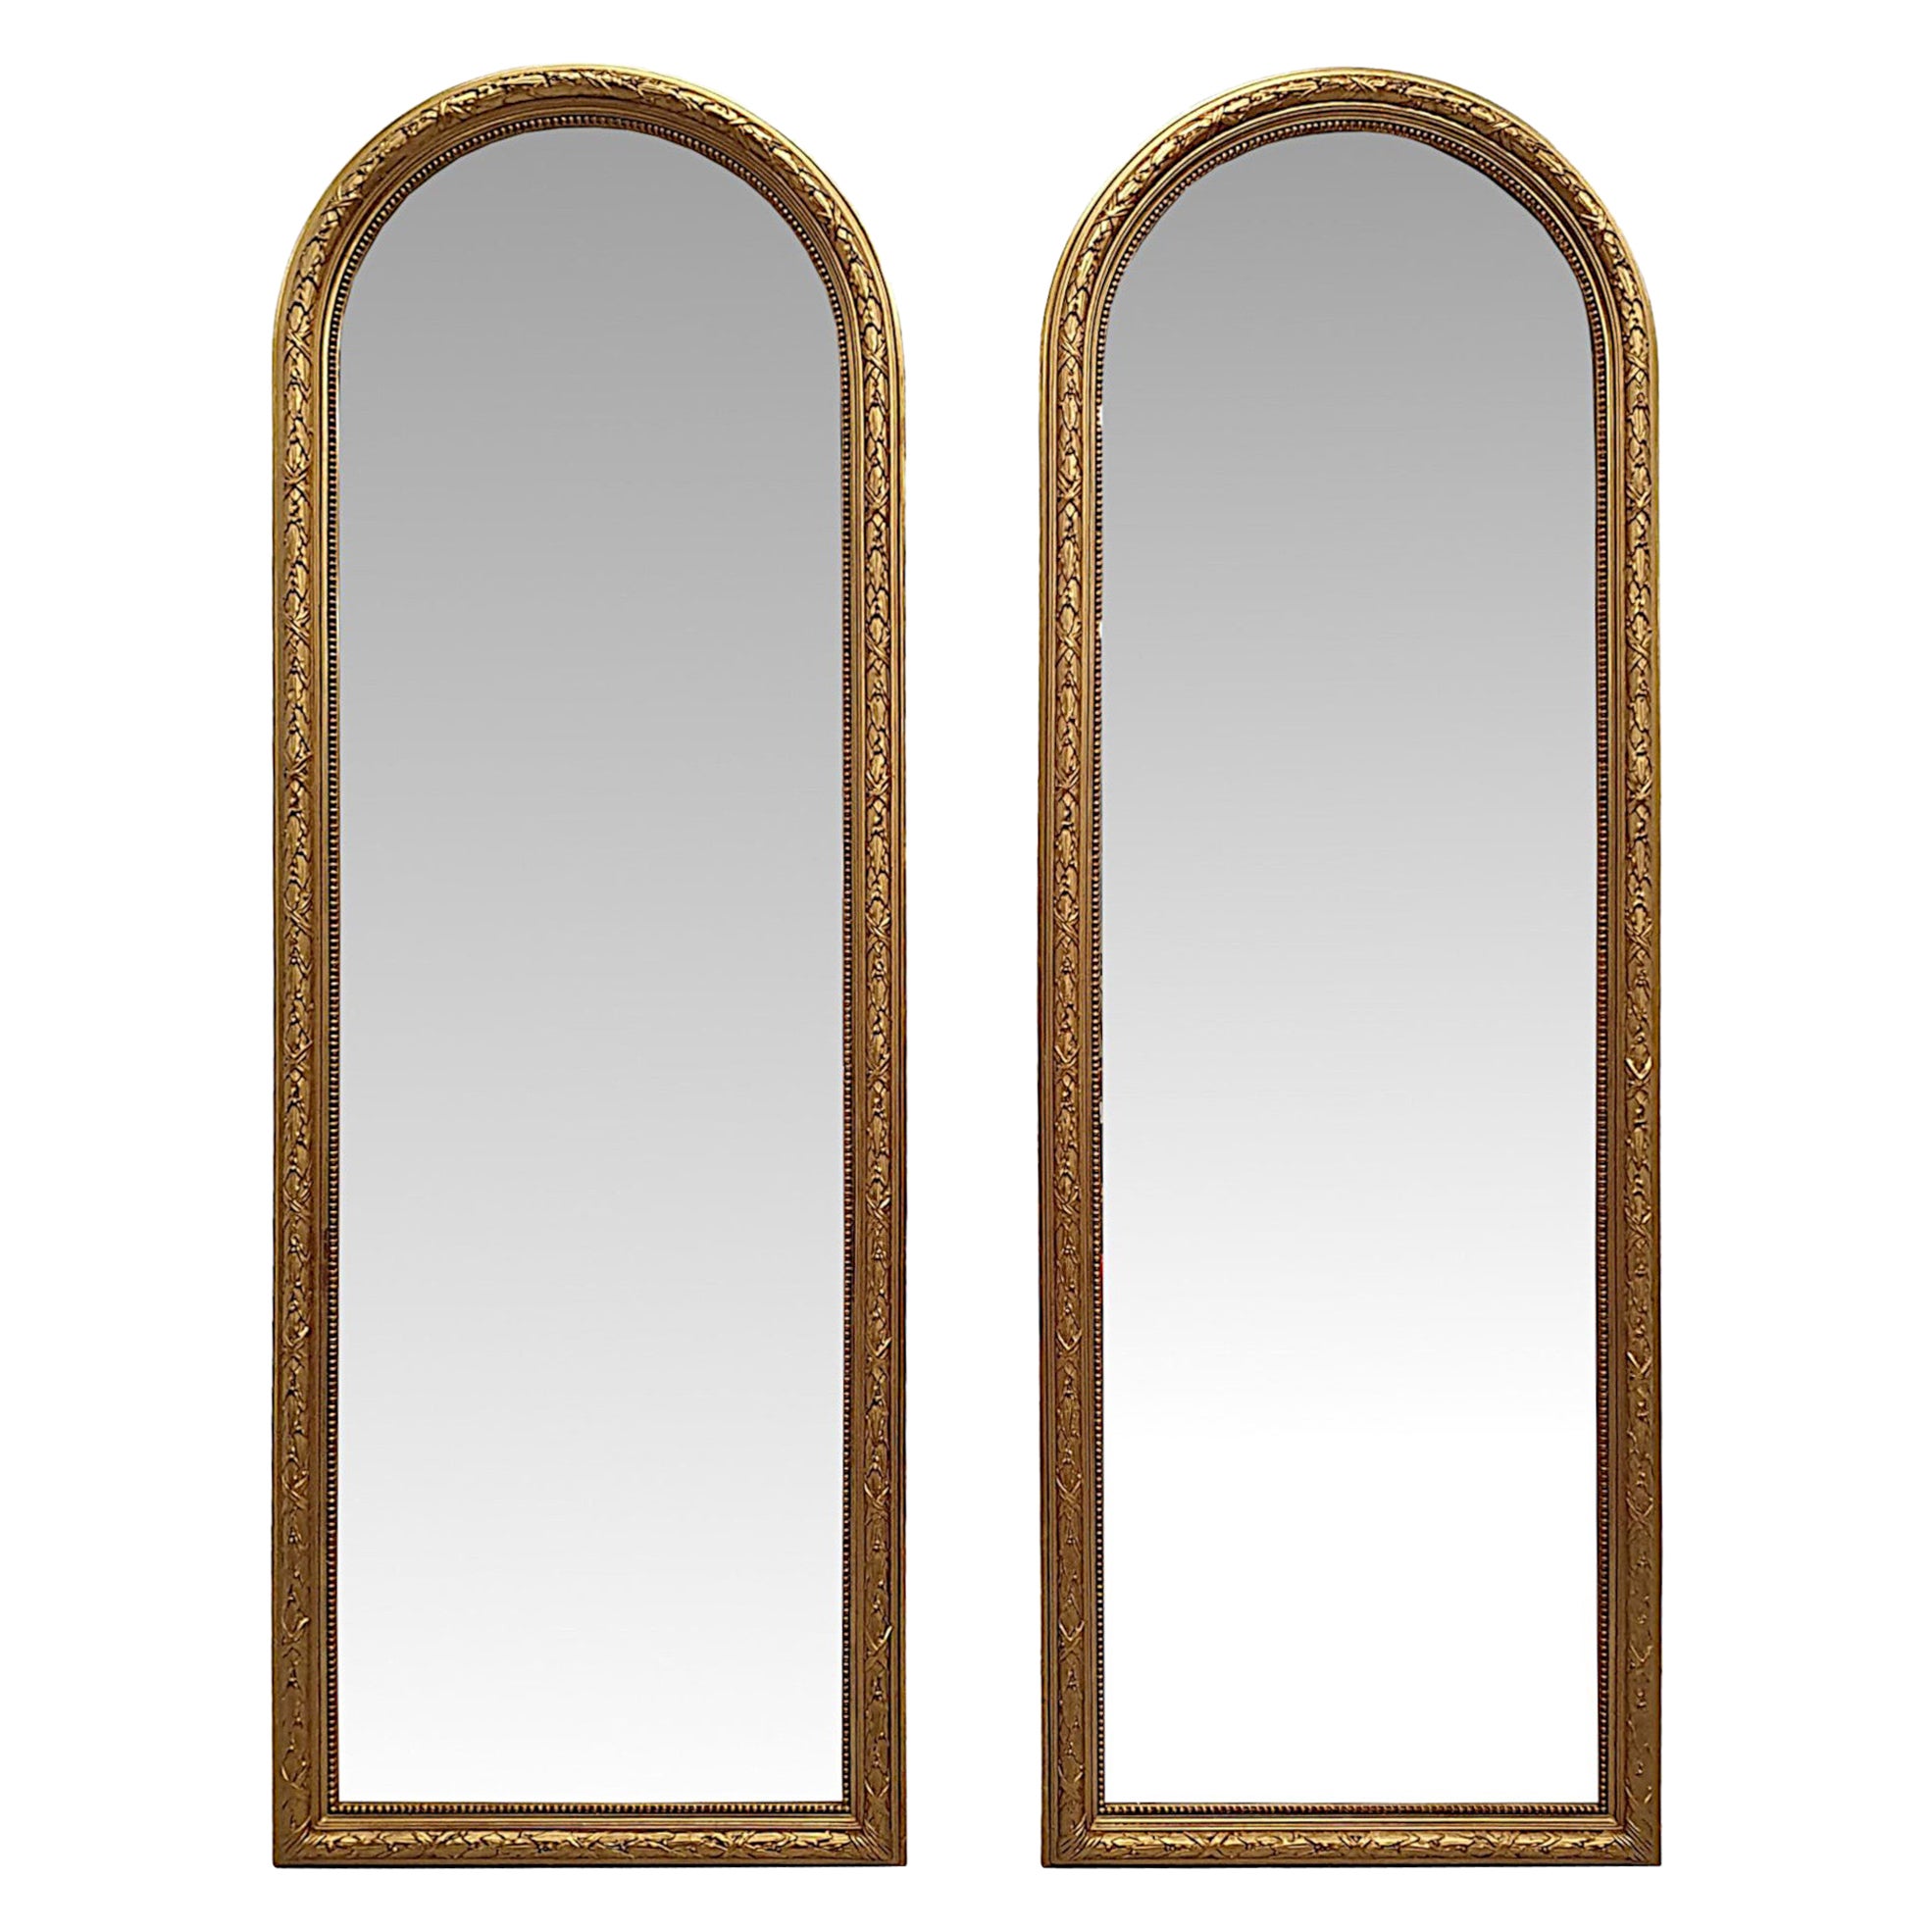 Very Rare and Fine Pair of 19th Century Giltwood Arch Top Pier Mirrors